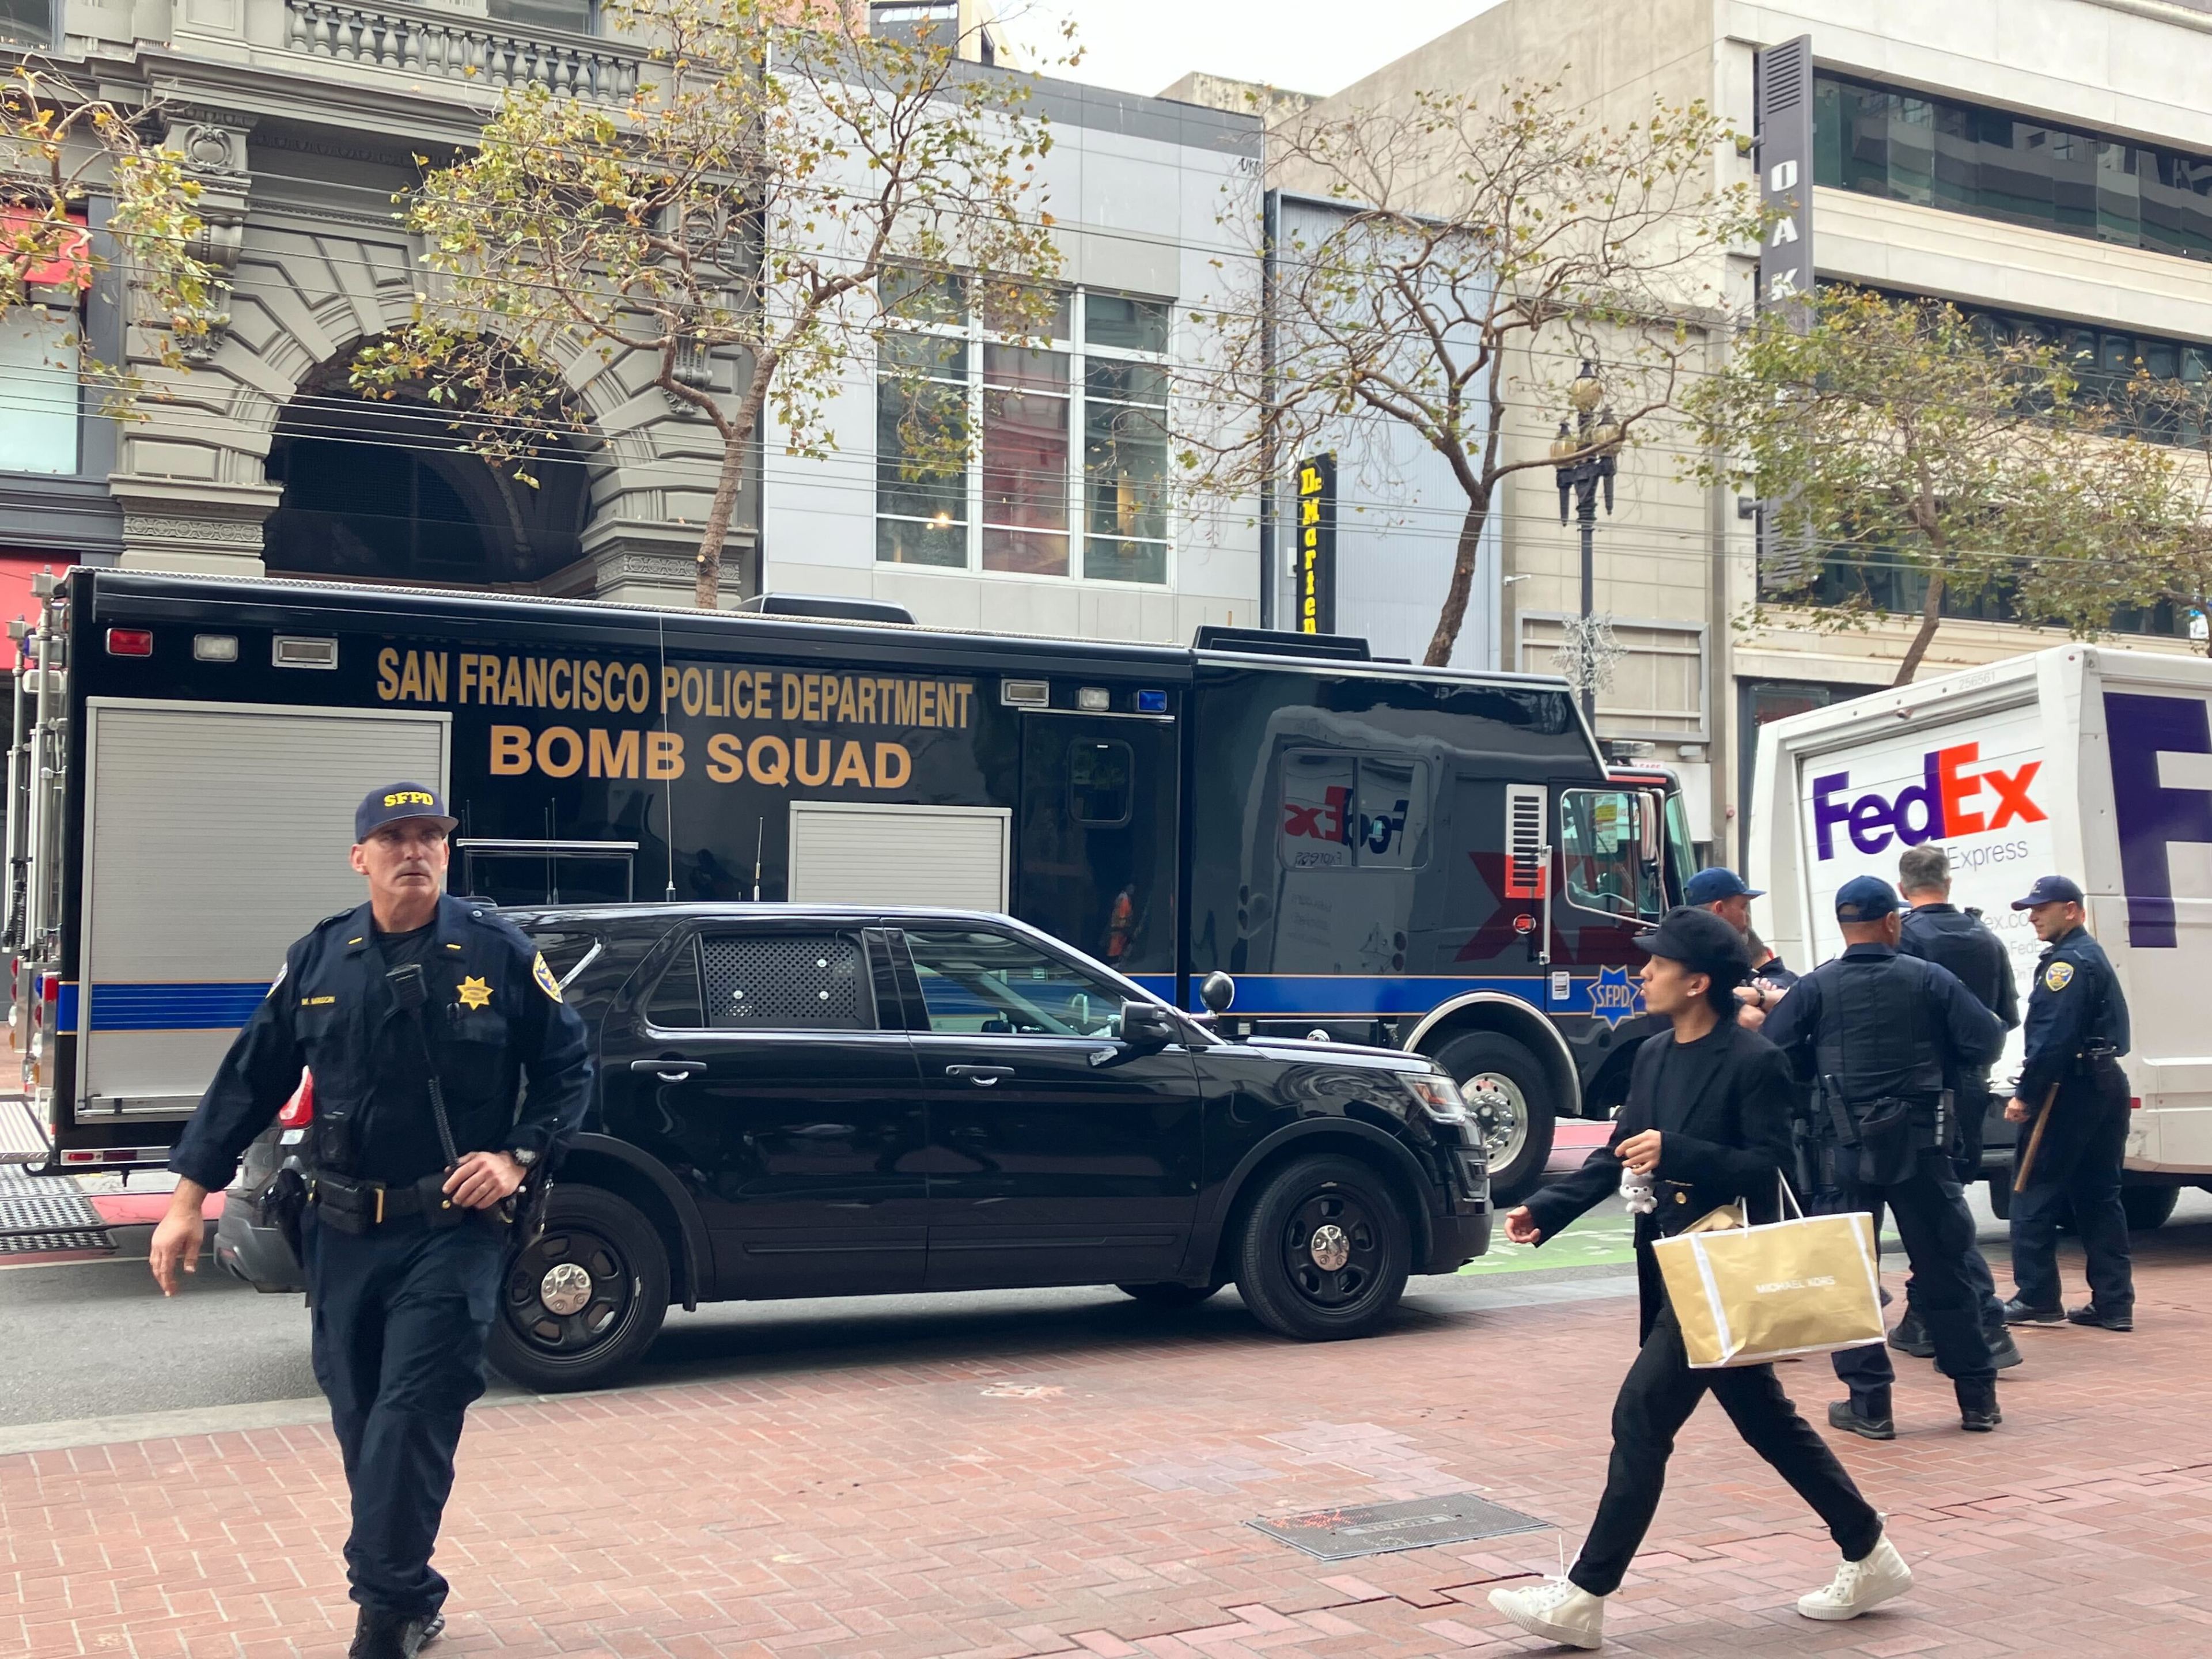 Uniformed police officers are walking near a large dark bomb squad van on a busy street as pedestrians pass by.